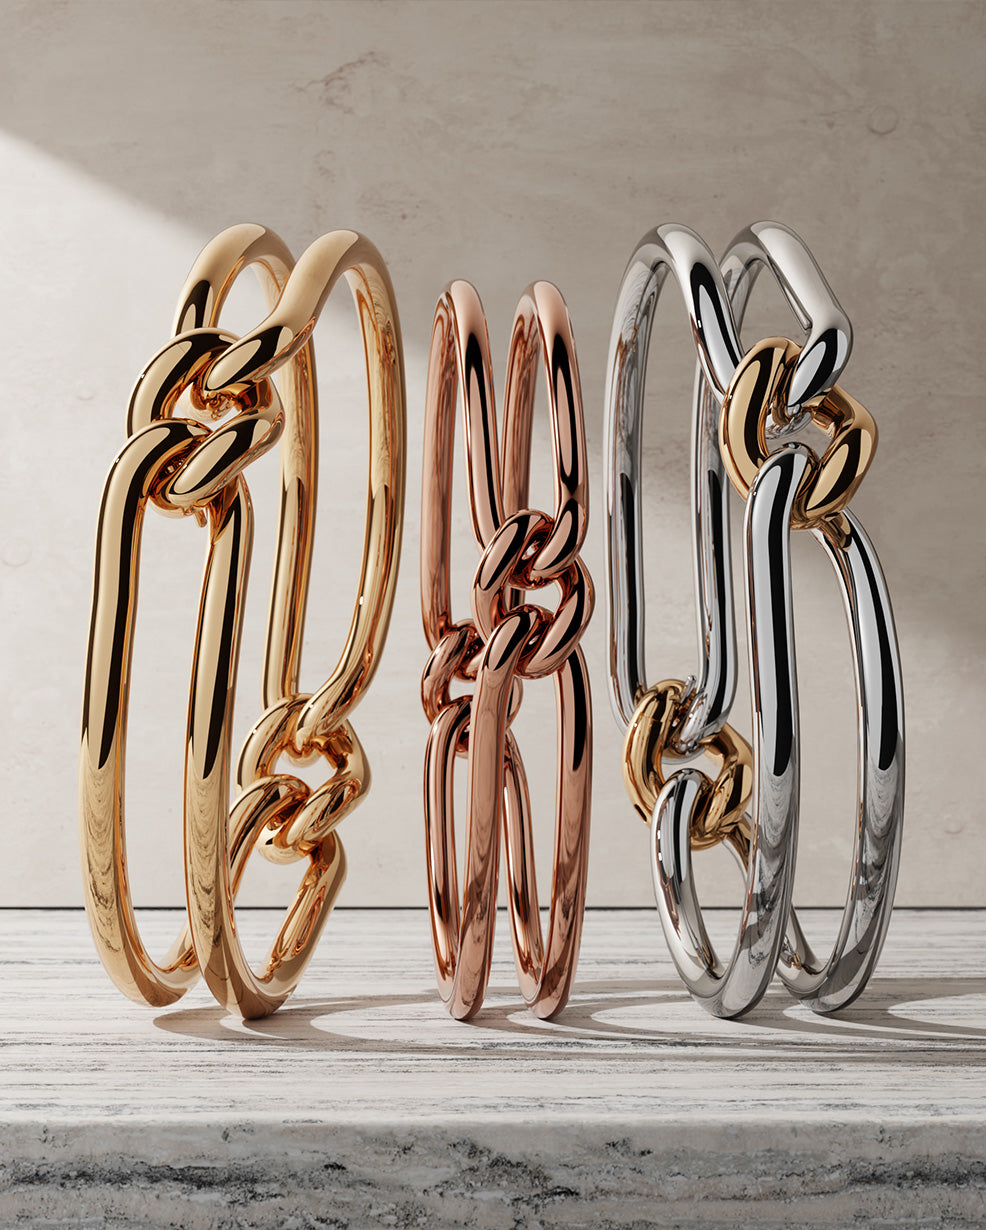 MAOR fine jewelry unity bracelet in yellow gold, rose gold and white gold